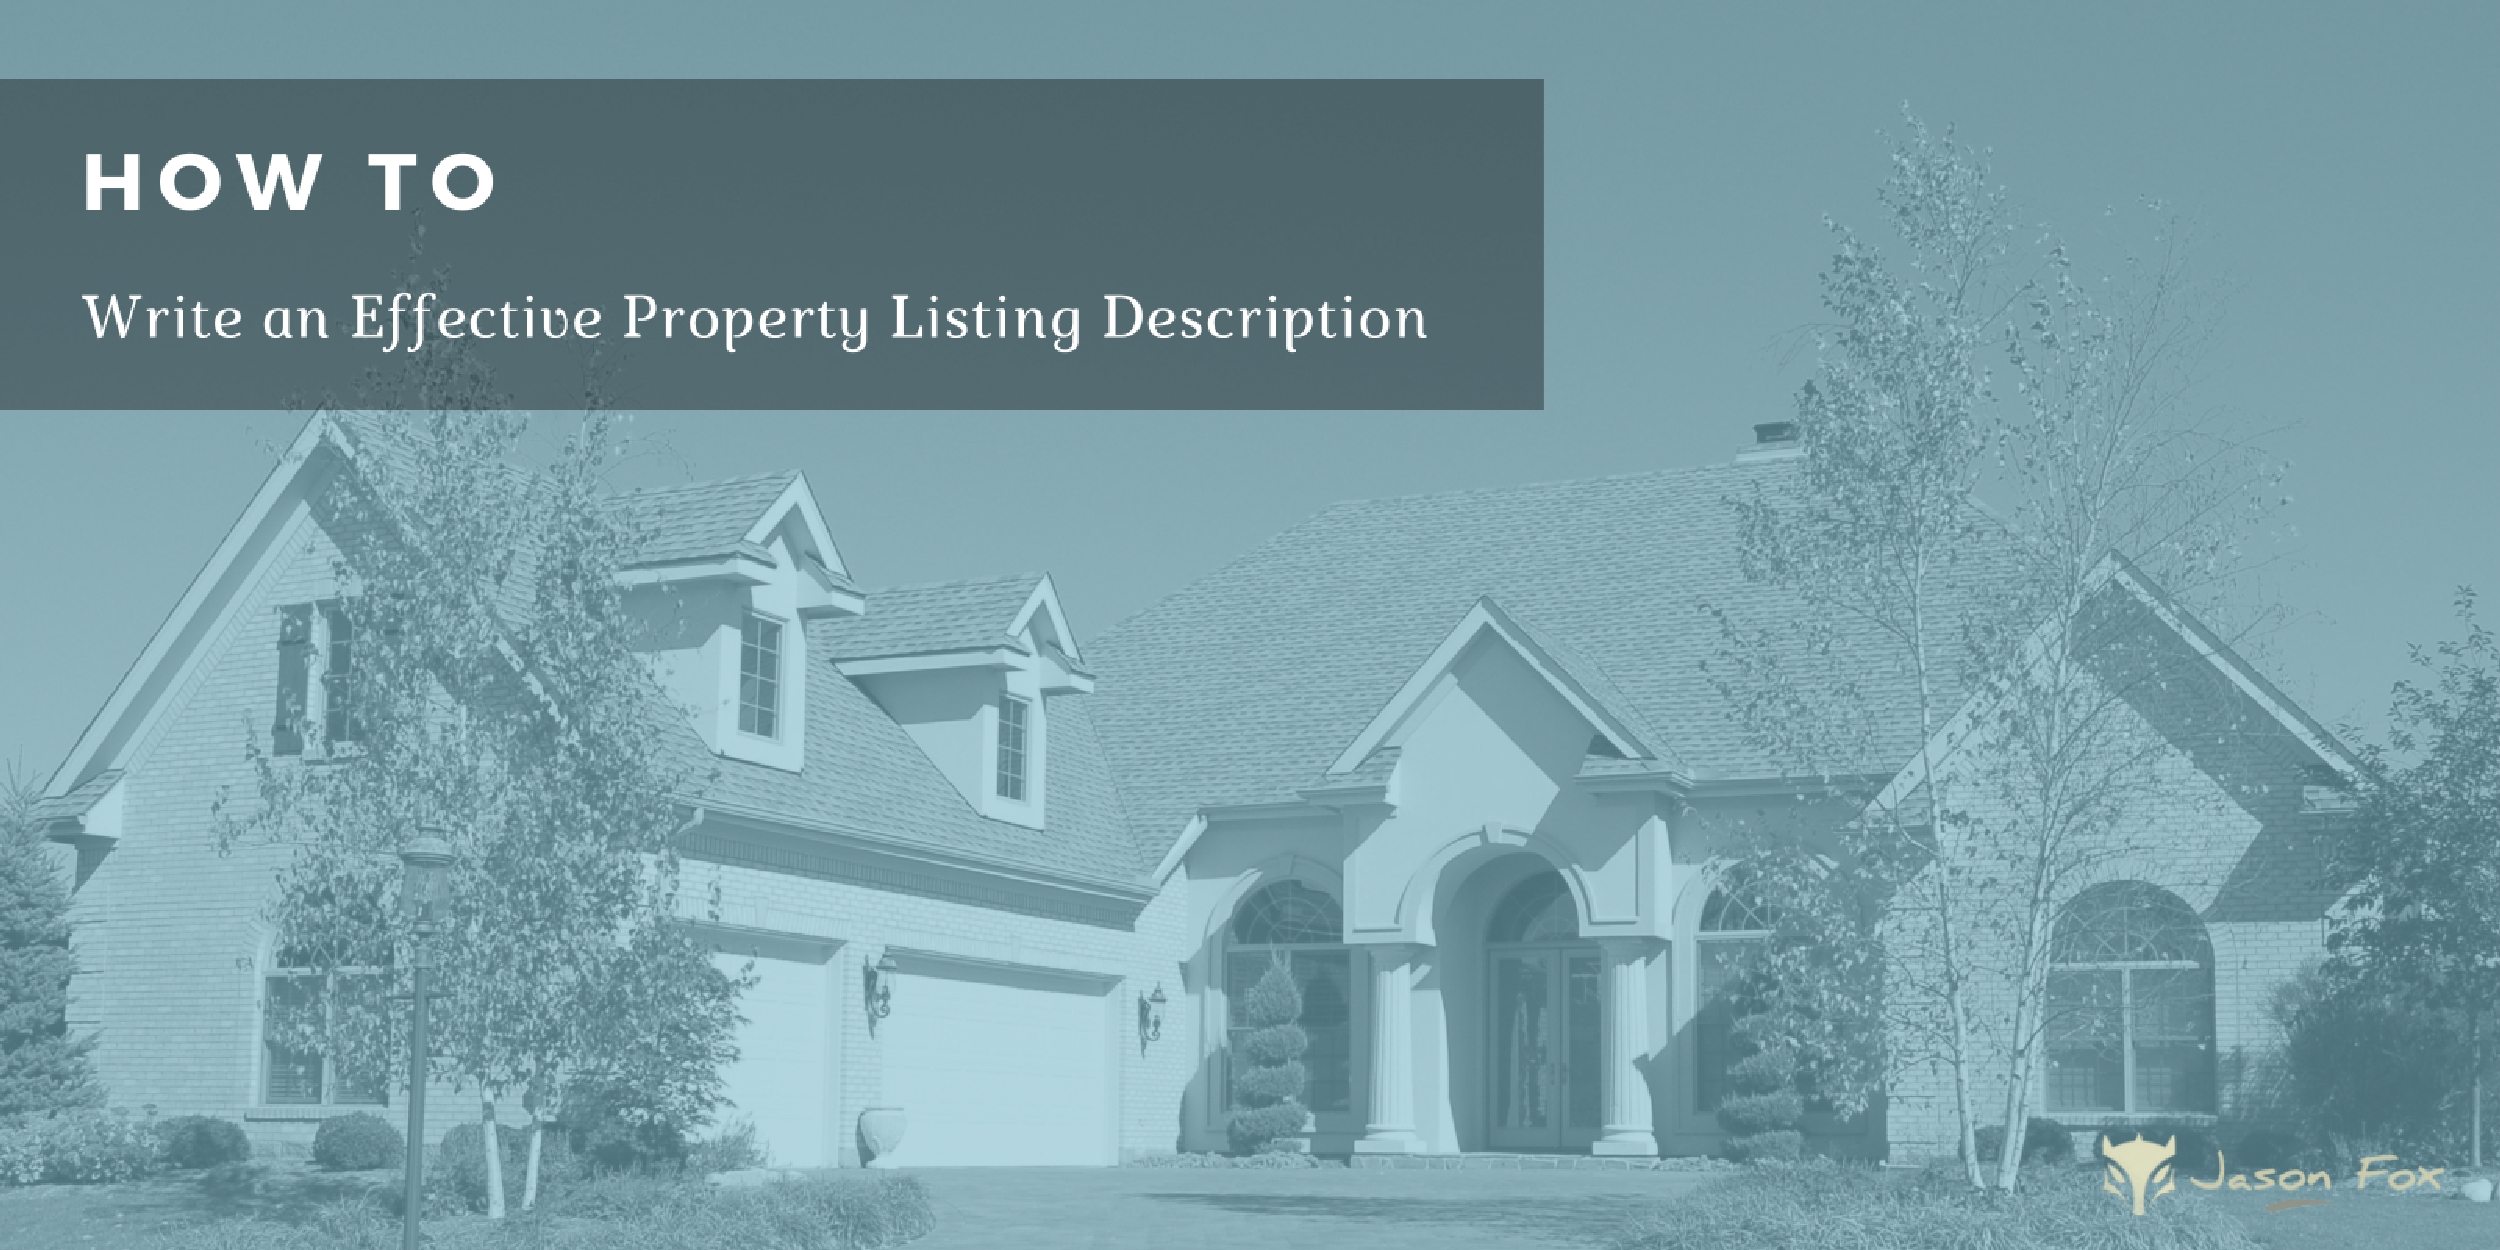 How to write an effective property listing description